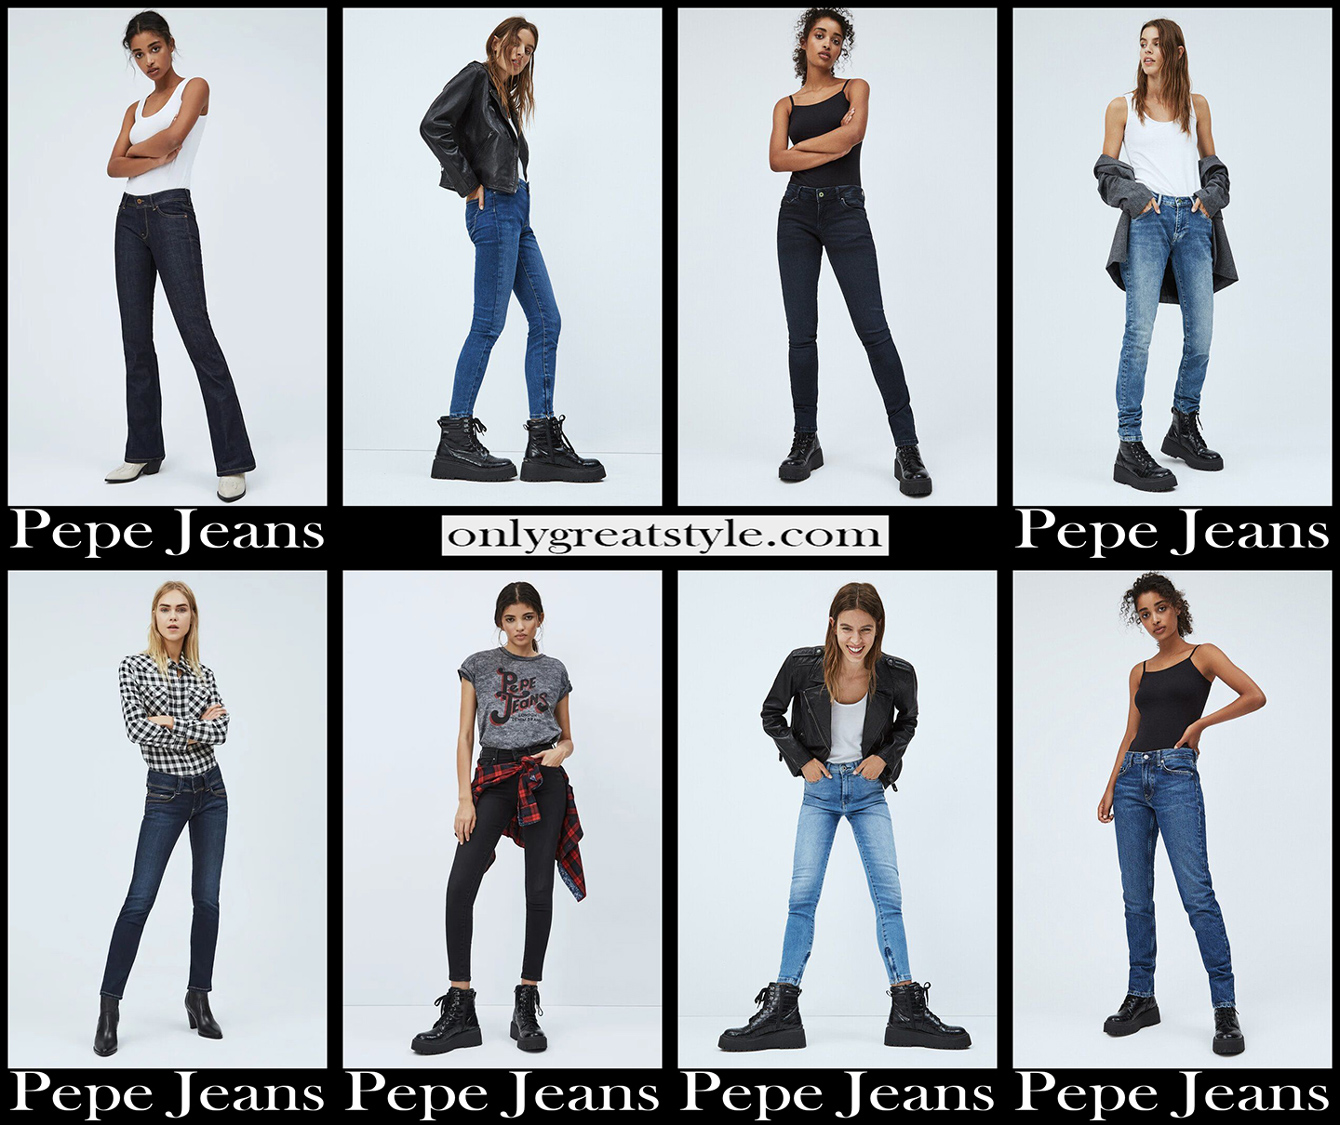 Pepe Jeans 2021 new arrivals womens clothing denim